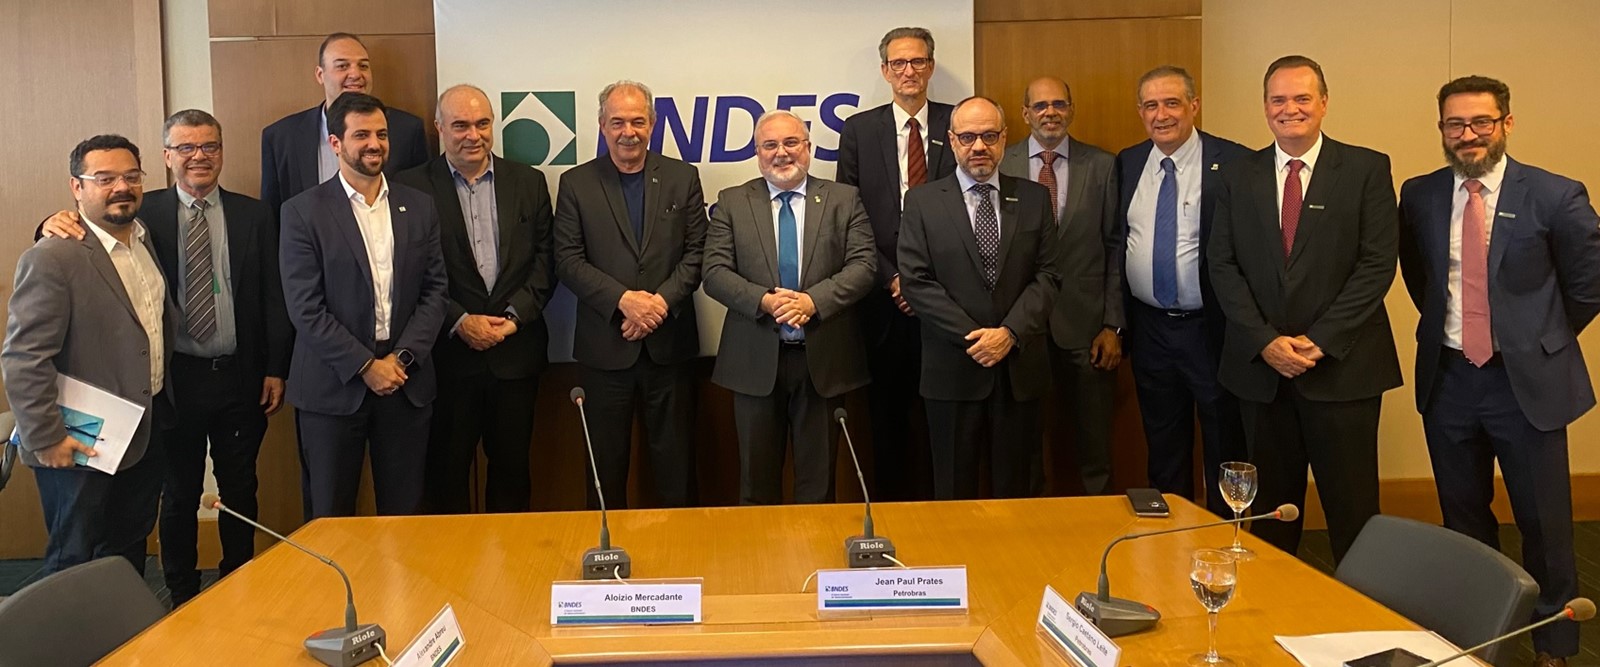 Transpetro President attends signing event of the Technical Cooperation Agreement with BNDES